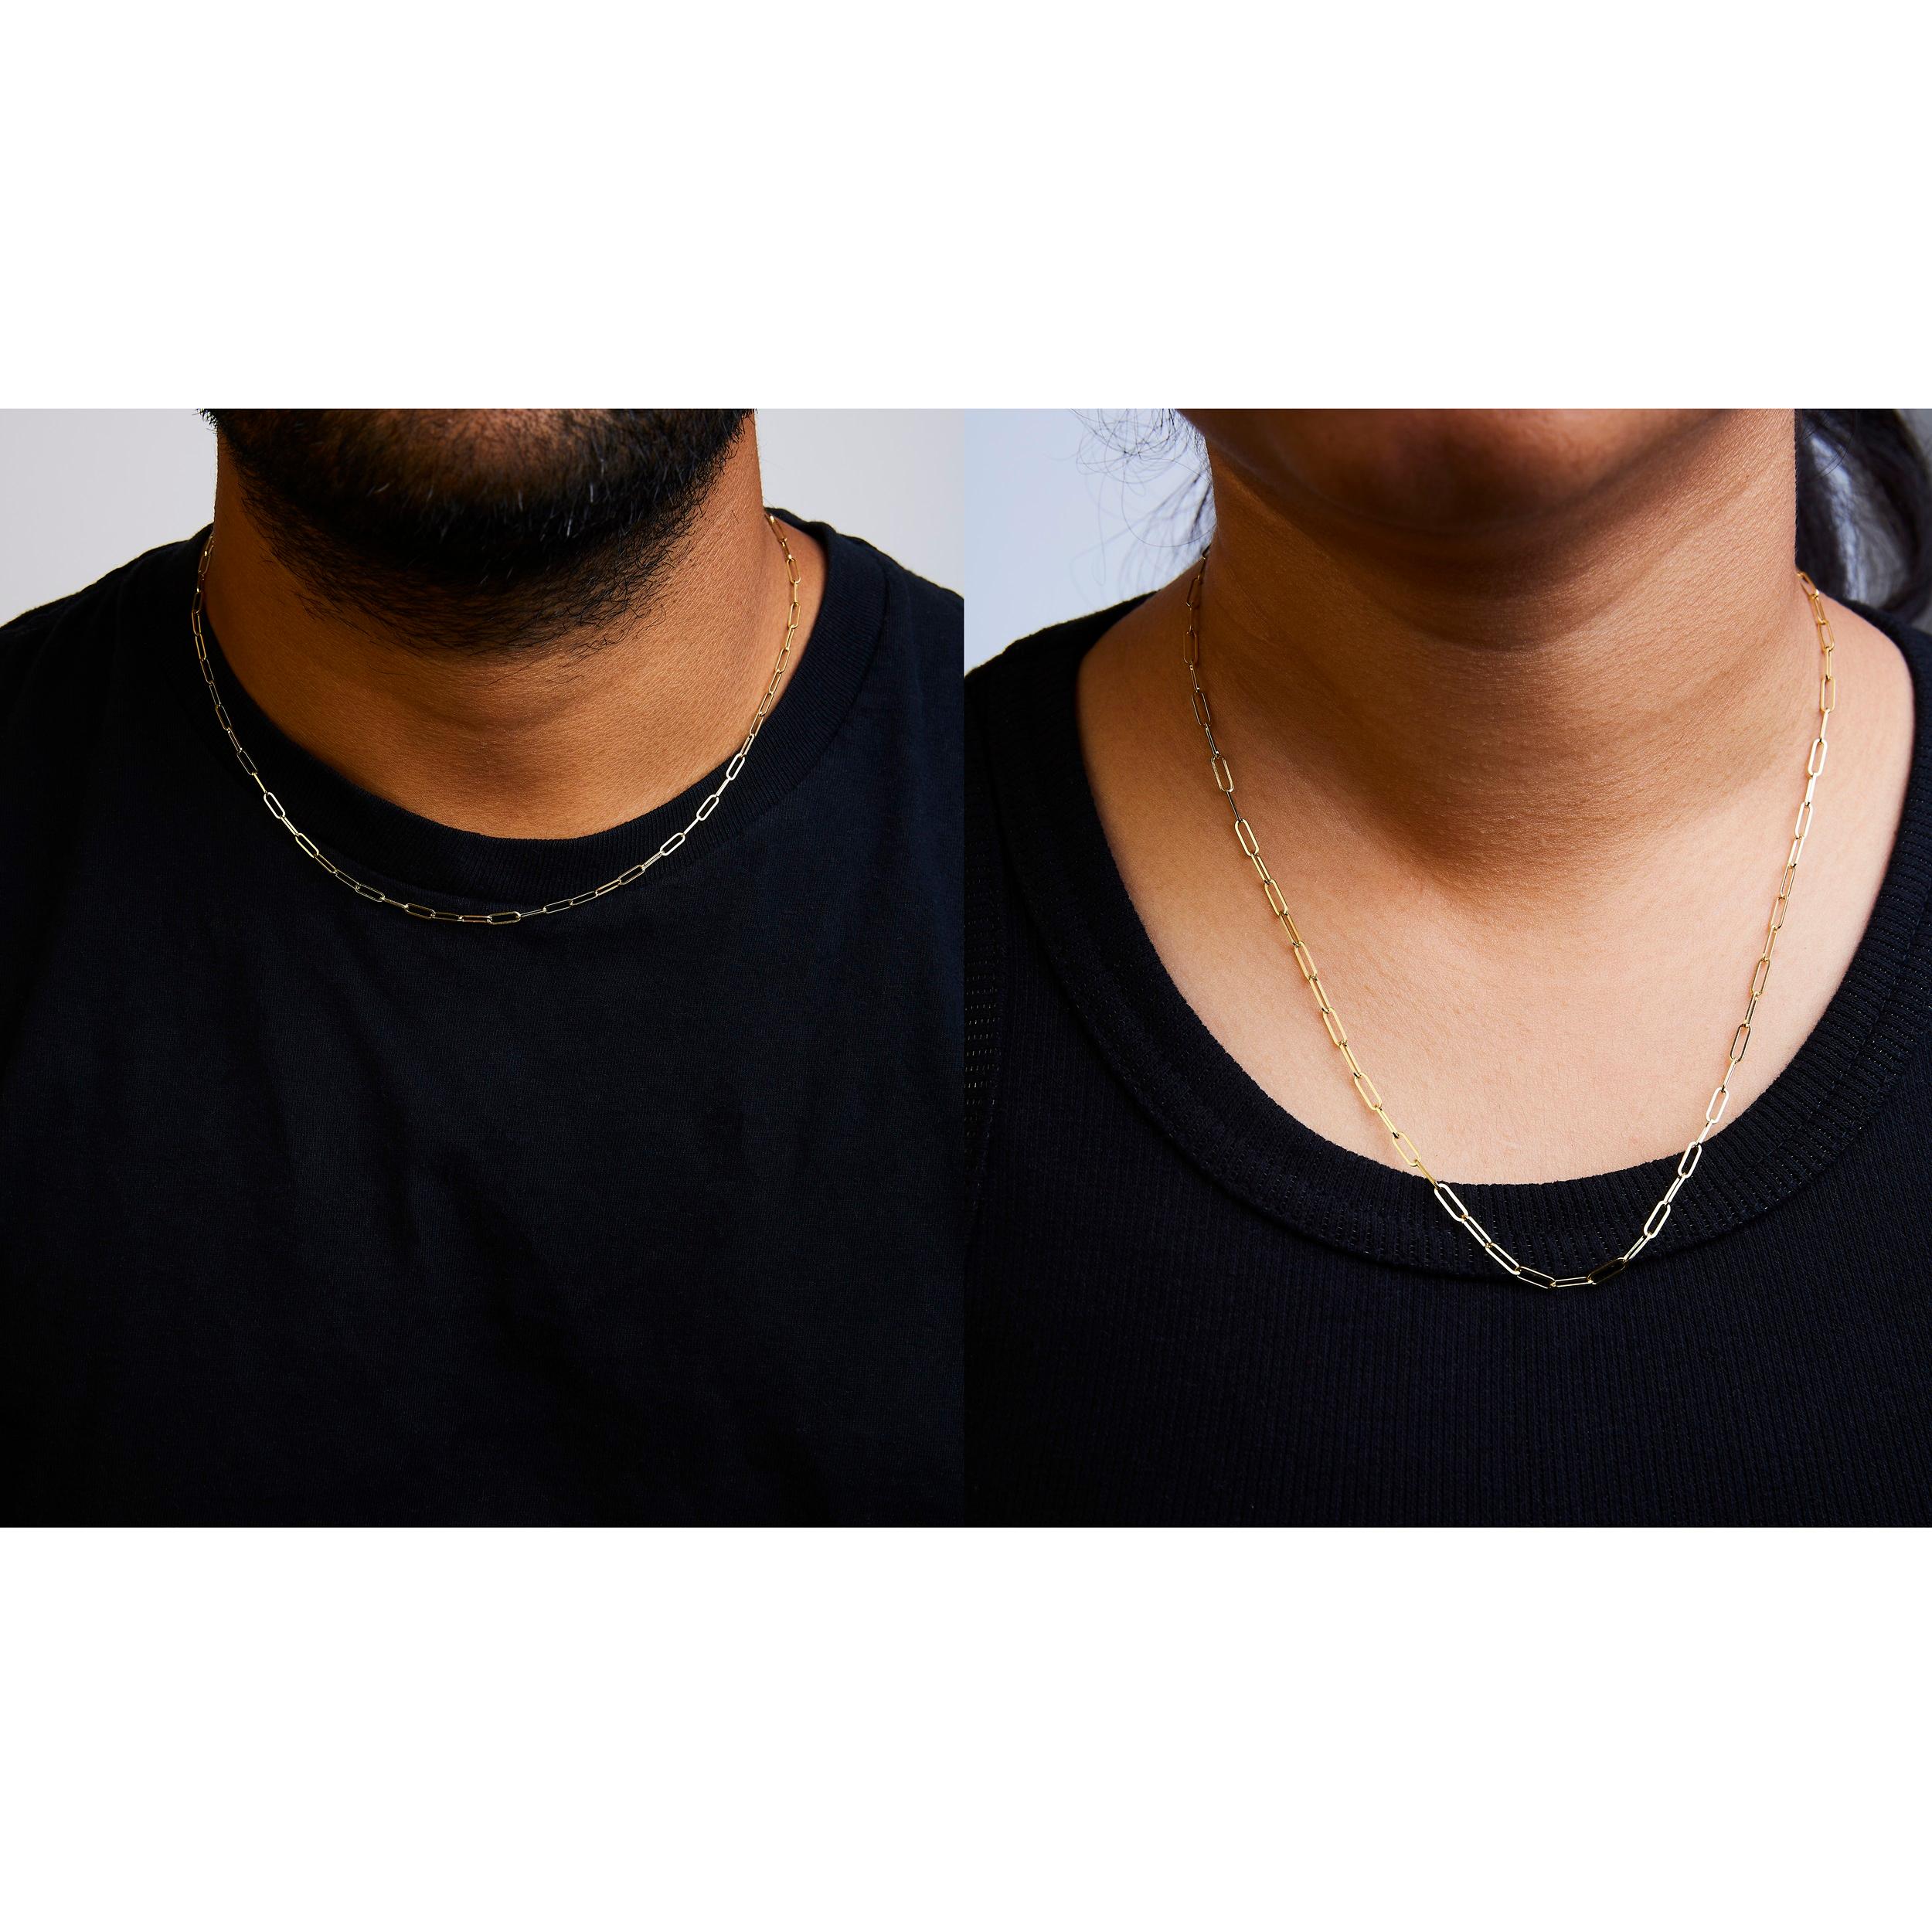 Solid 14K Yellow Gold 2.5mm Paperclip Chain Necklace Unisex 18